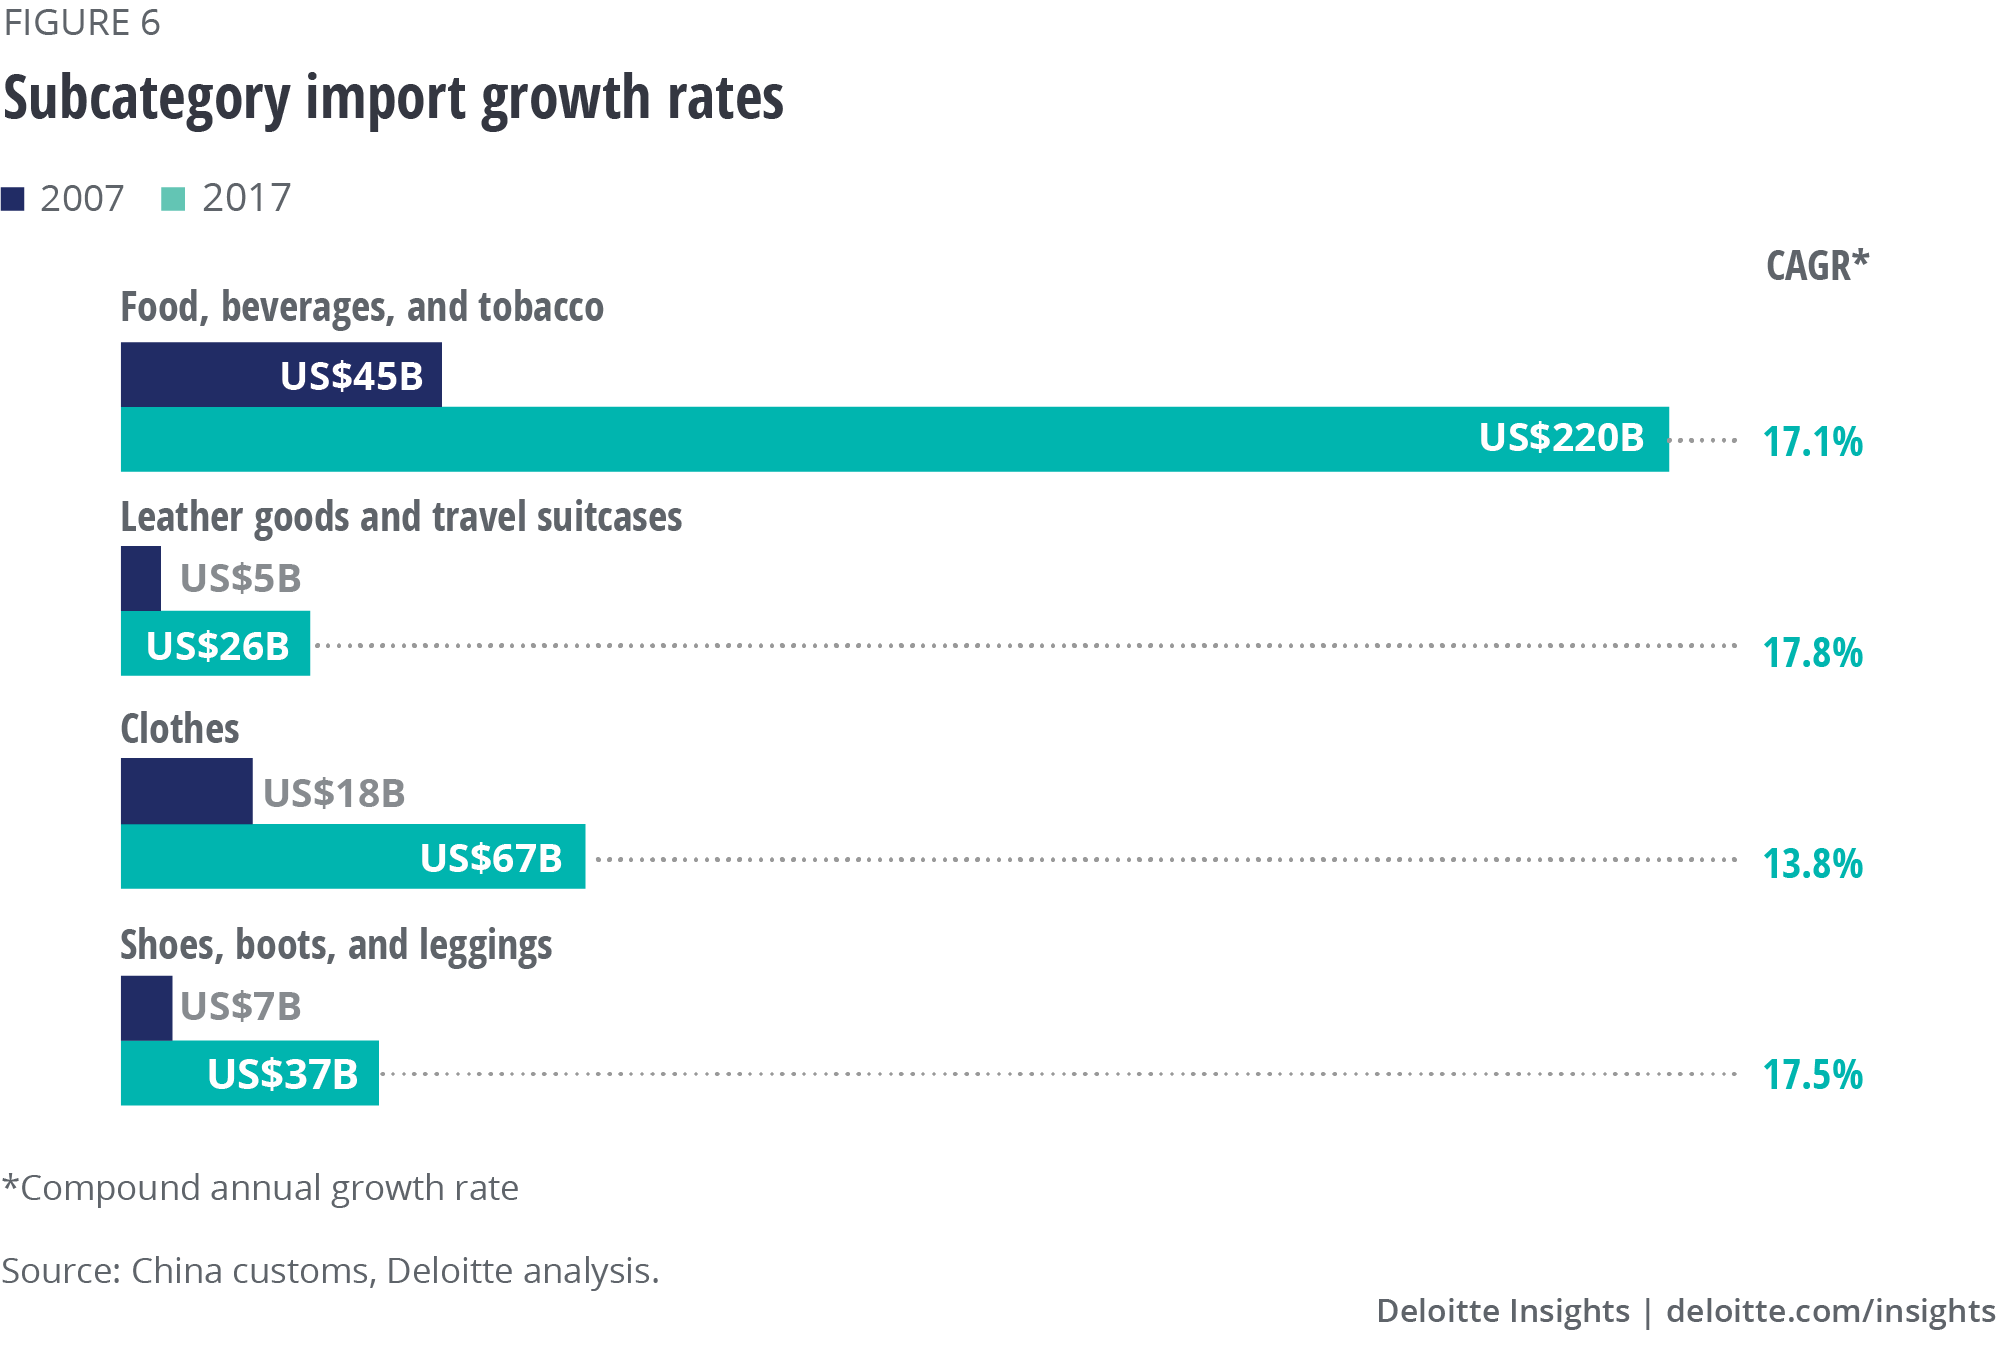 Subcategory import growth rates